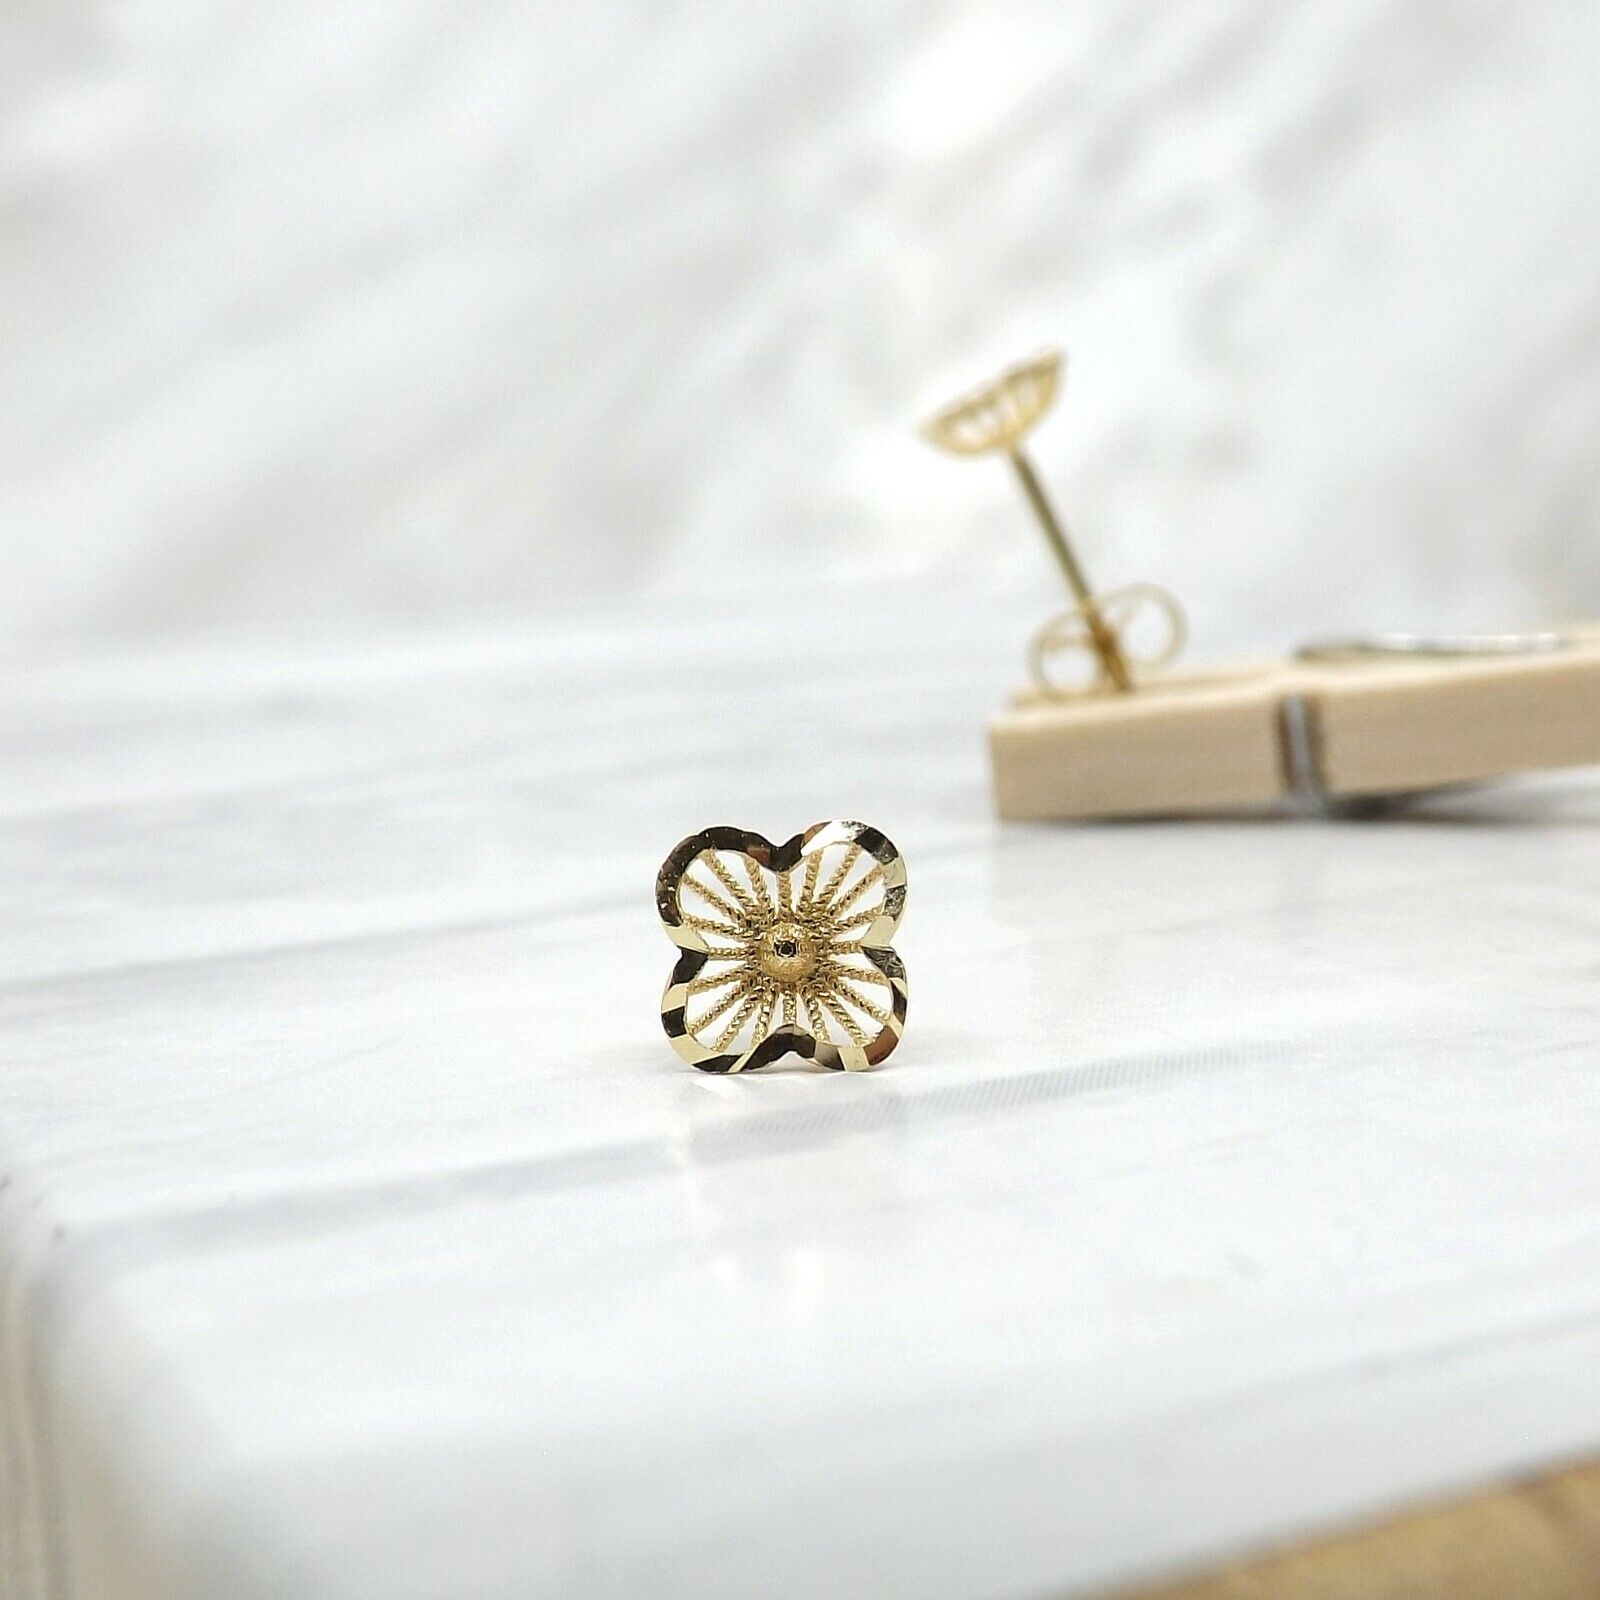 18k Solid Yellow Gold 6mm Clover Shape Stud Earrings, 3D Printed, Gift For Her